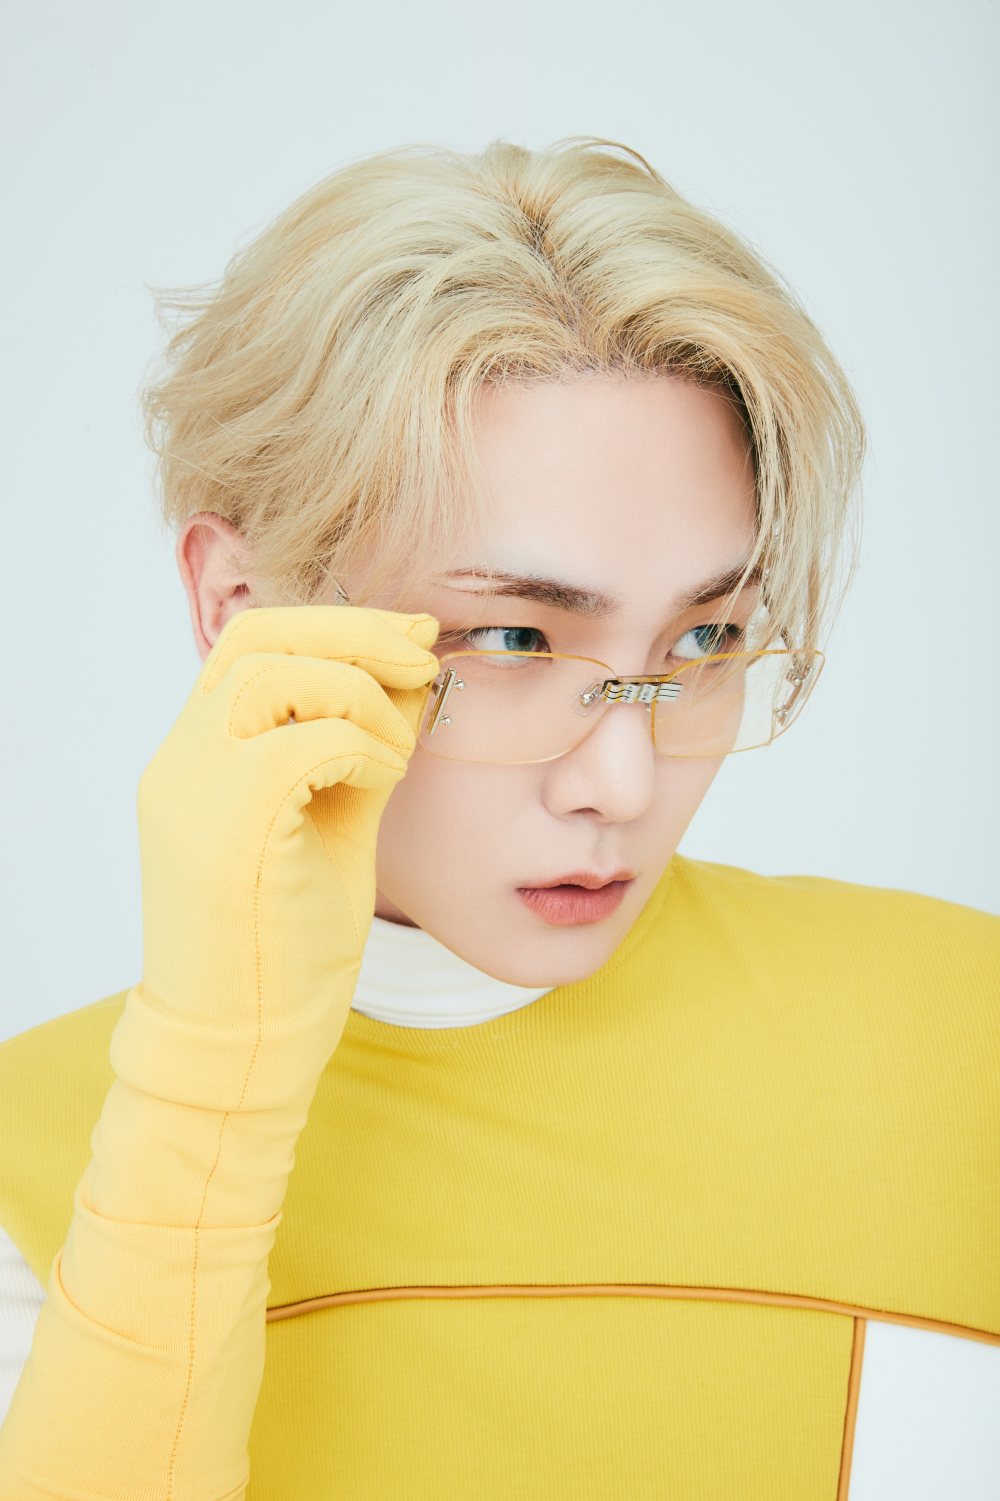 SHINee's Key - teaser image for Beyond LIVE solo show 'GROKS IN THE KEYLAND' for his first mini-album 'Bad Love'